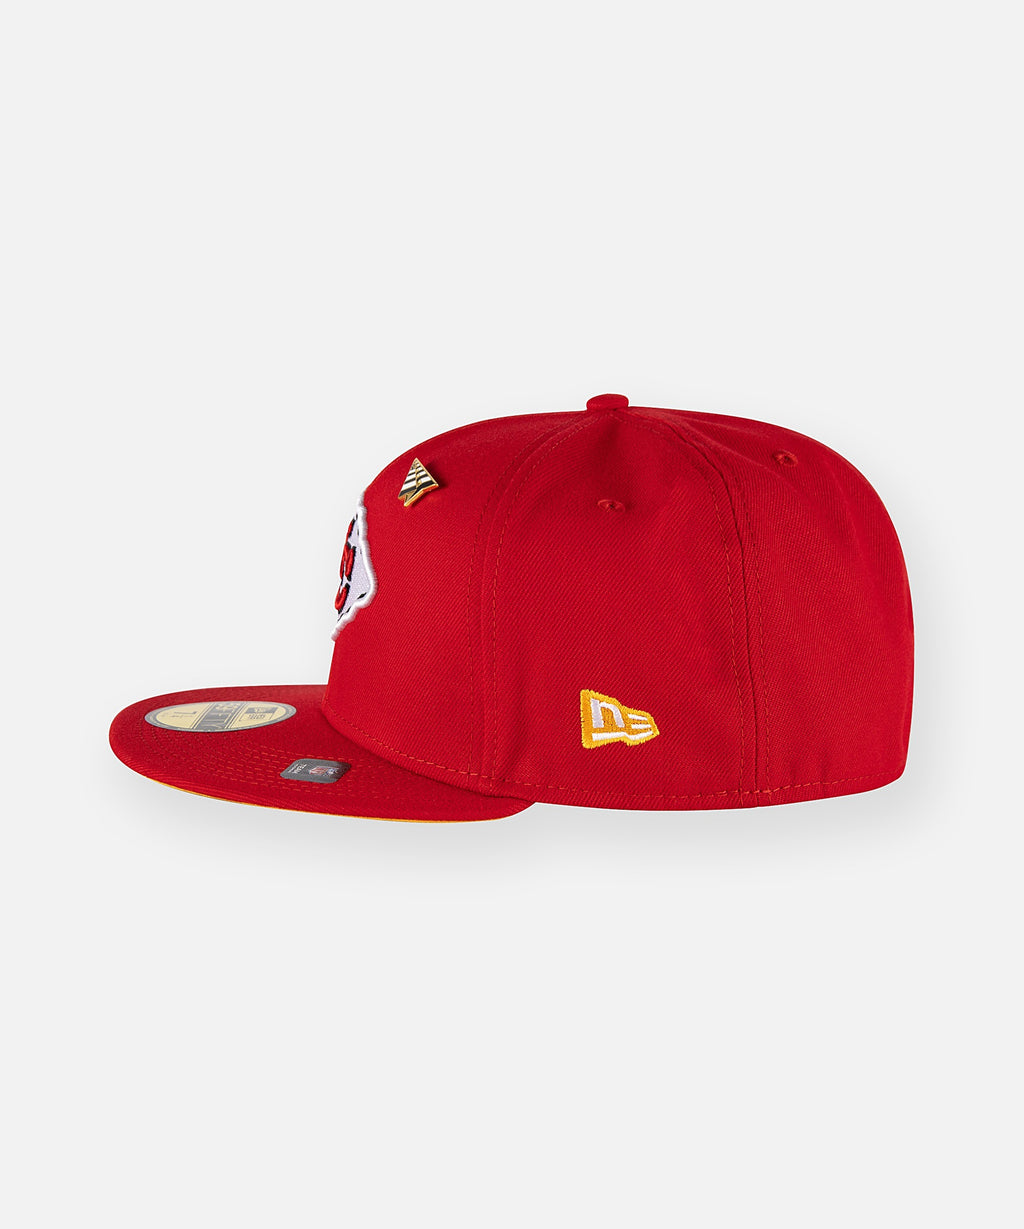 Paper Planes x Kansas City Chiefs Team Color 59Fifty Fitted Hat_For Men_4